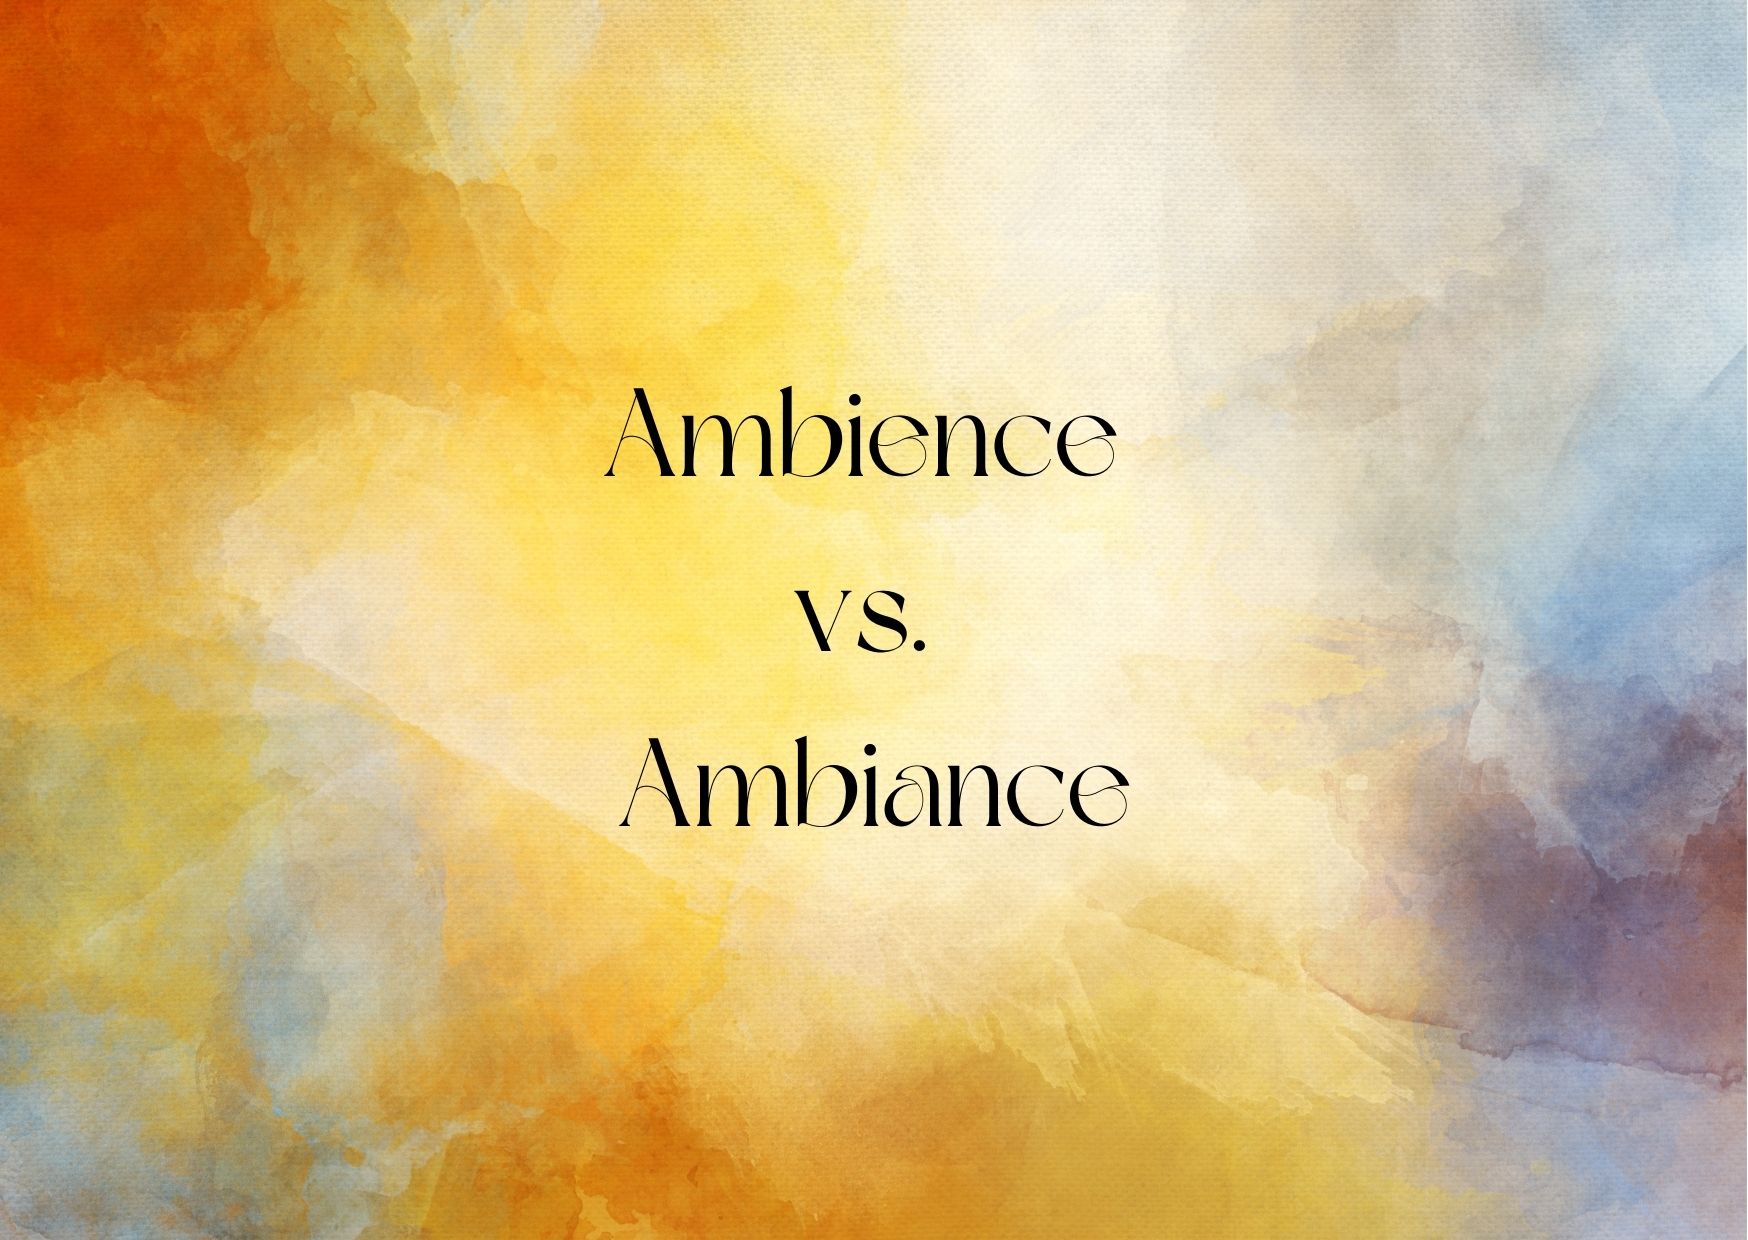 Ambience vs. Ambiance